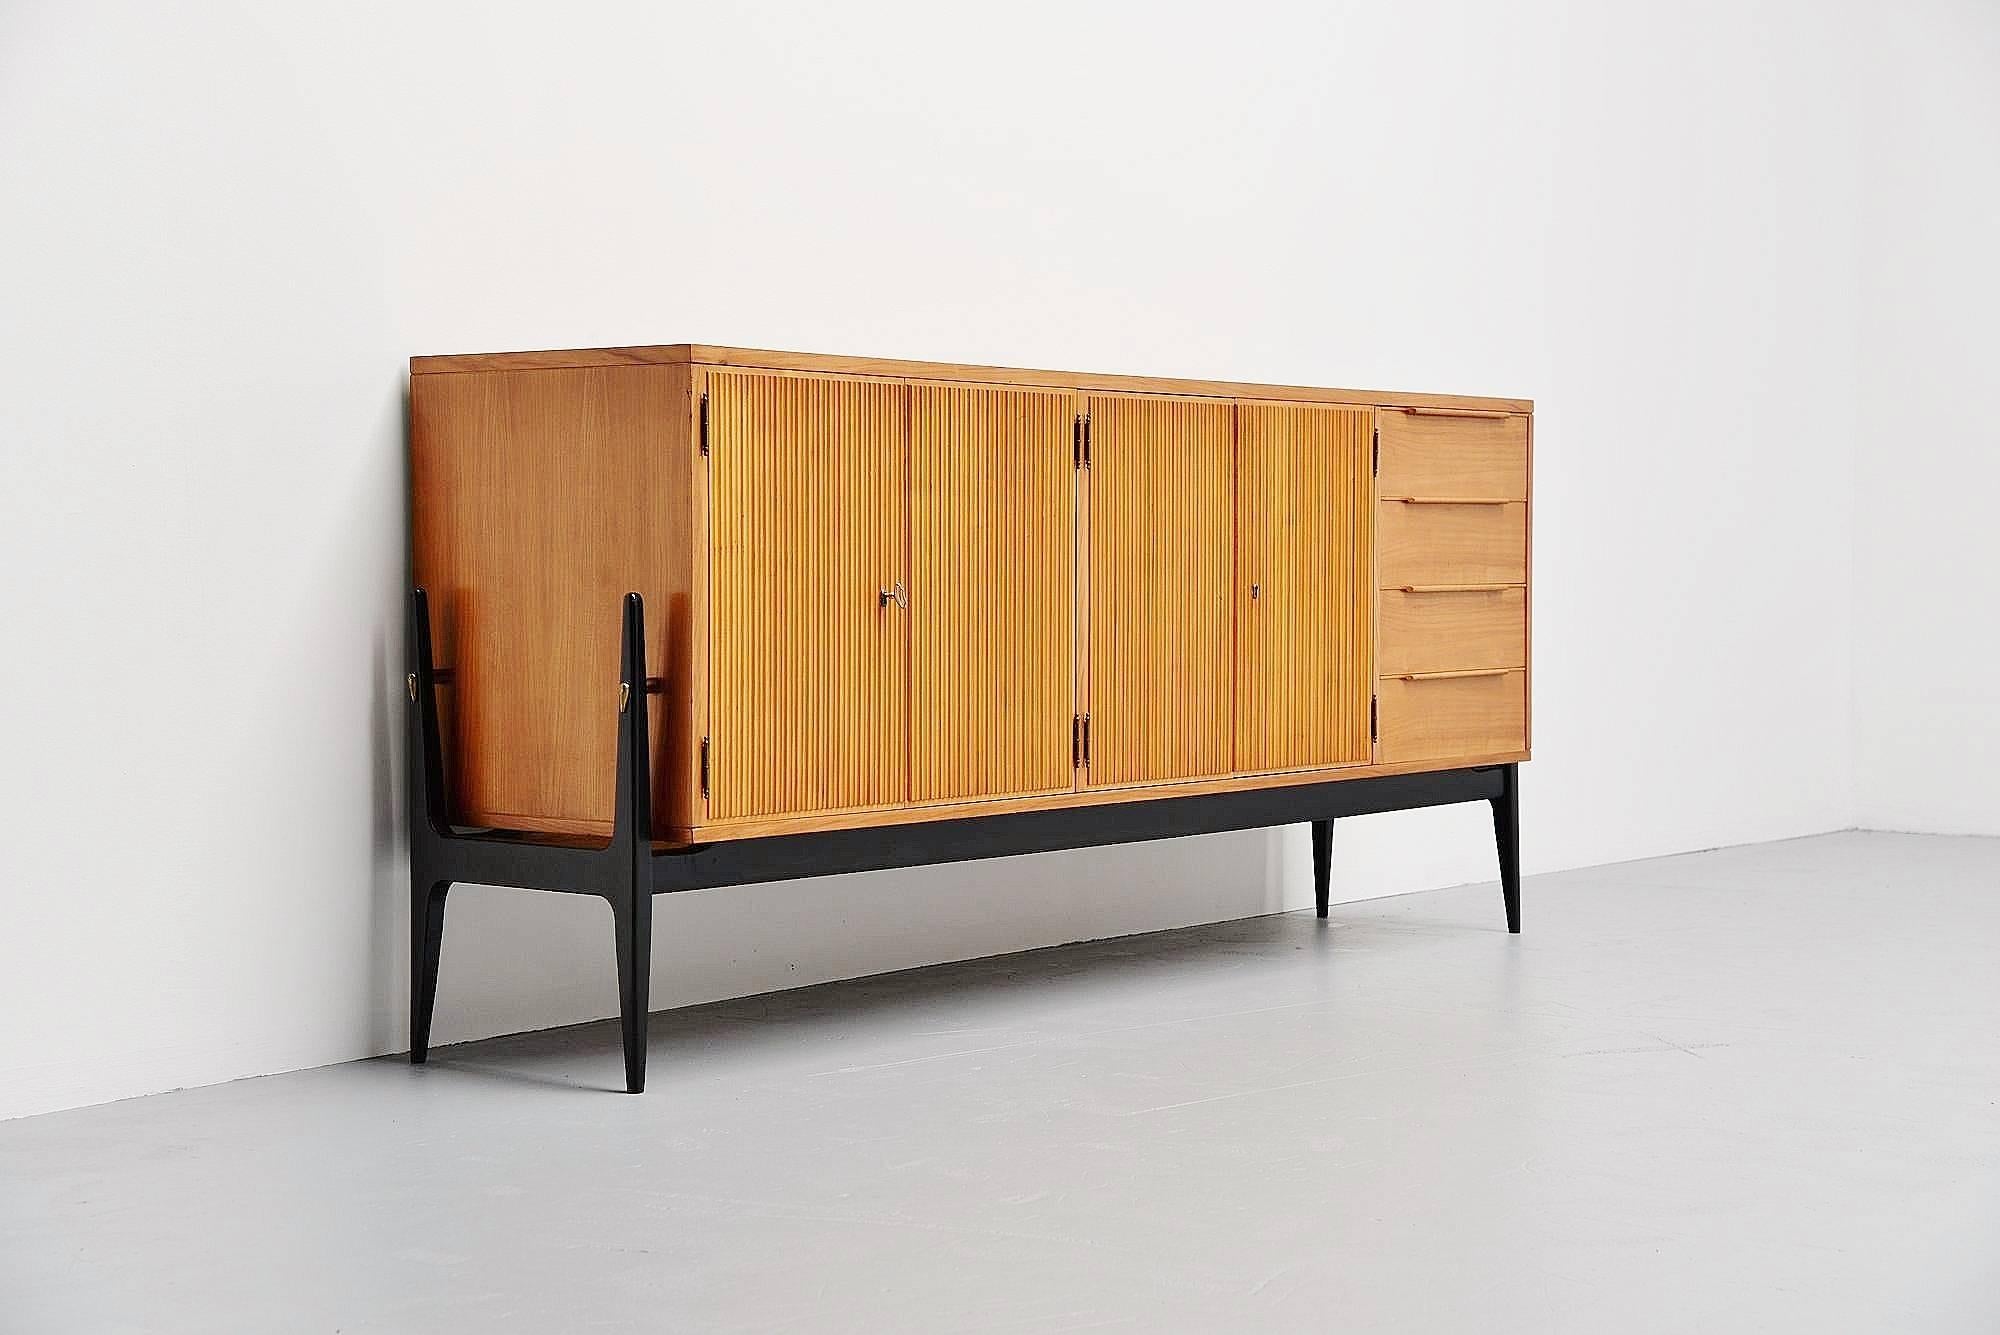 Here for a very nice sideboard often sold as an Alfred Hendrickx design, while in fact this is made by De Coene, Belgium, 1950. And Alfred Hendrickx never worked for de Coene. So the designer is unknown to me but is very beautifully made. This has a